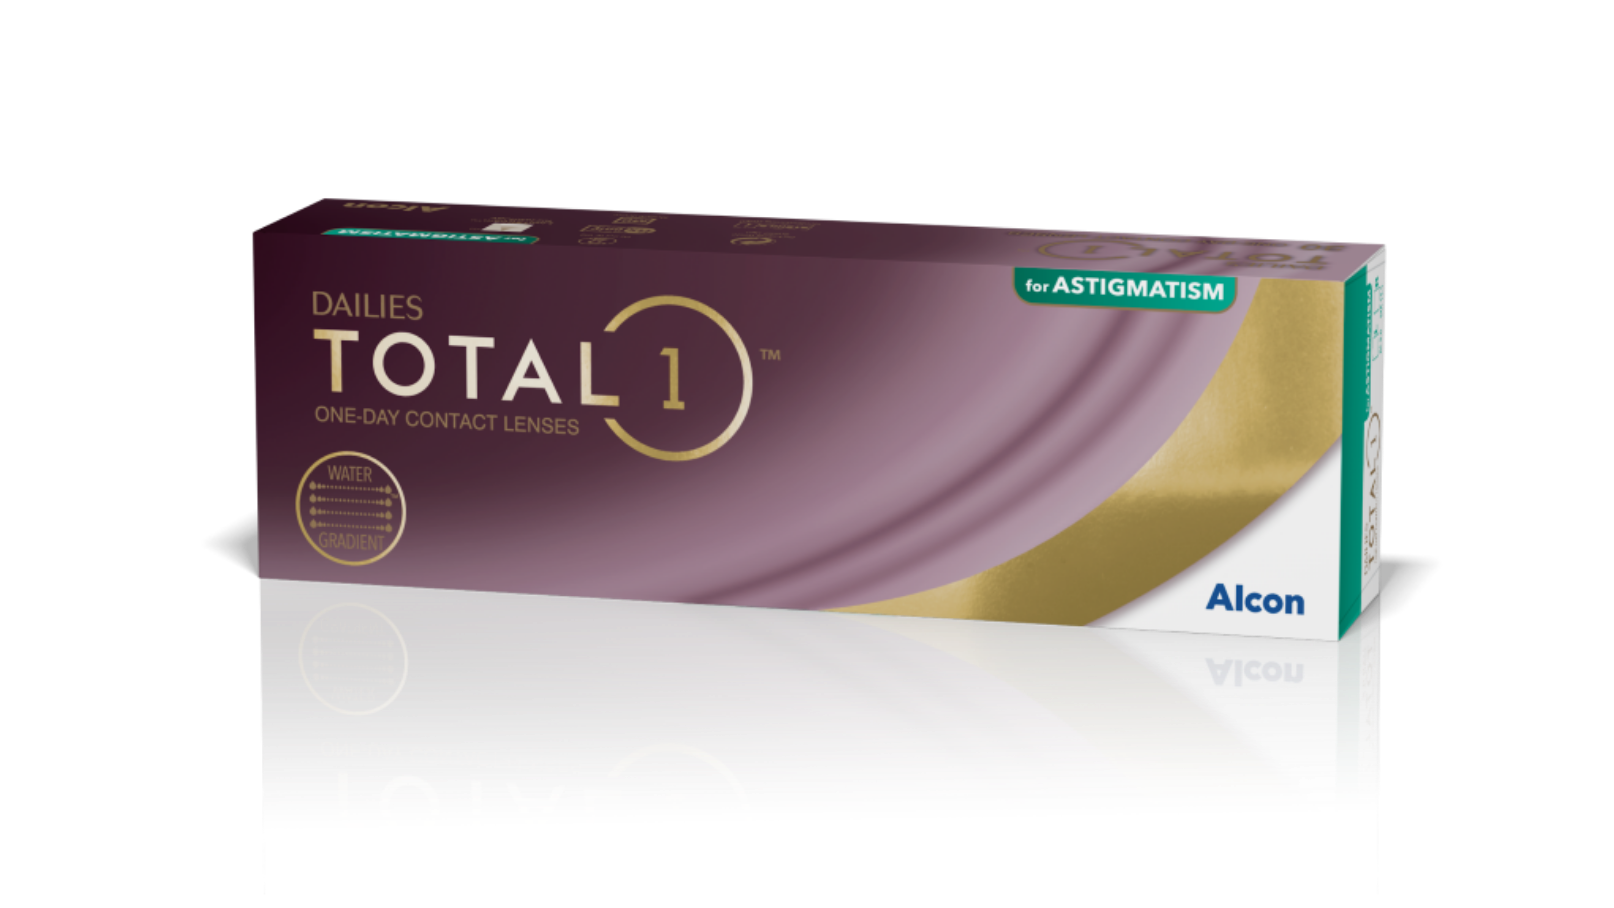 Dailies Total1® for Astigmatism